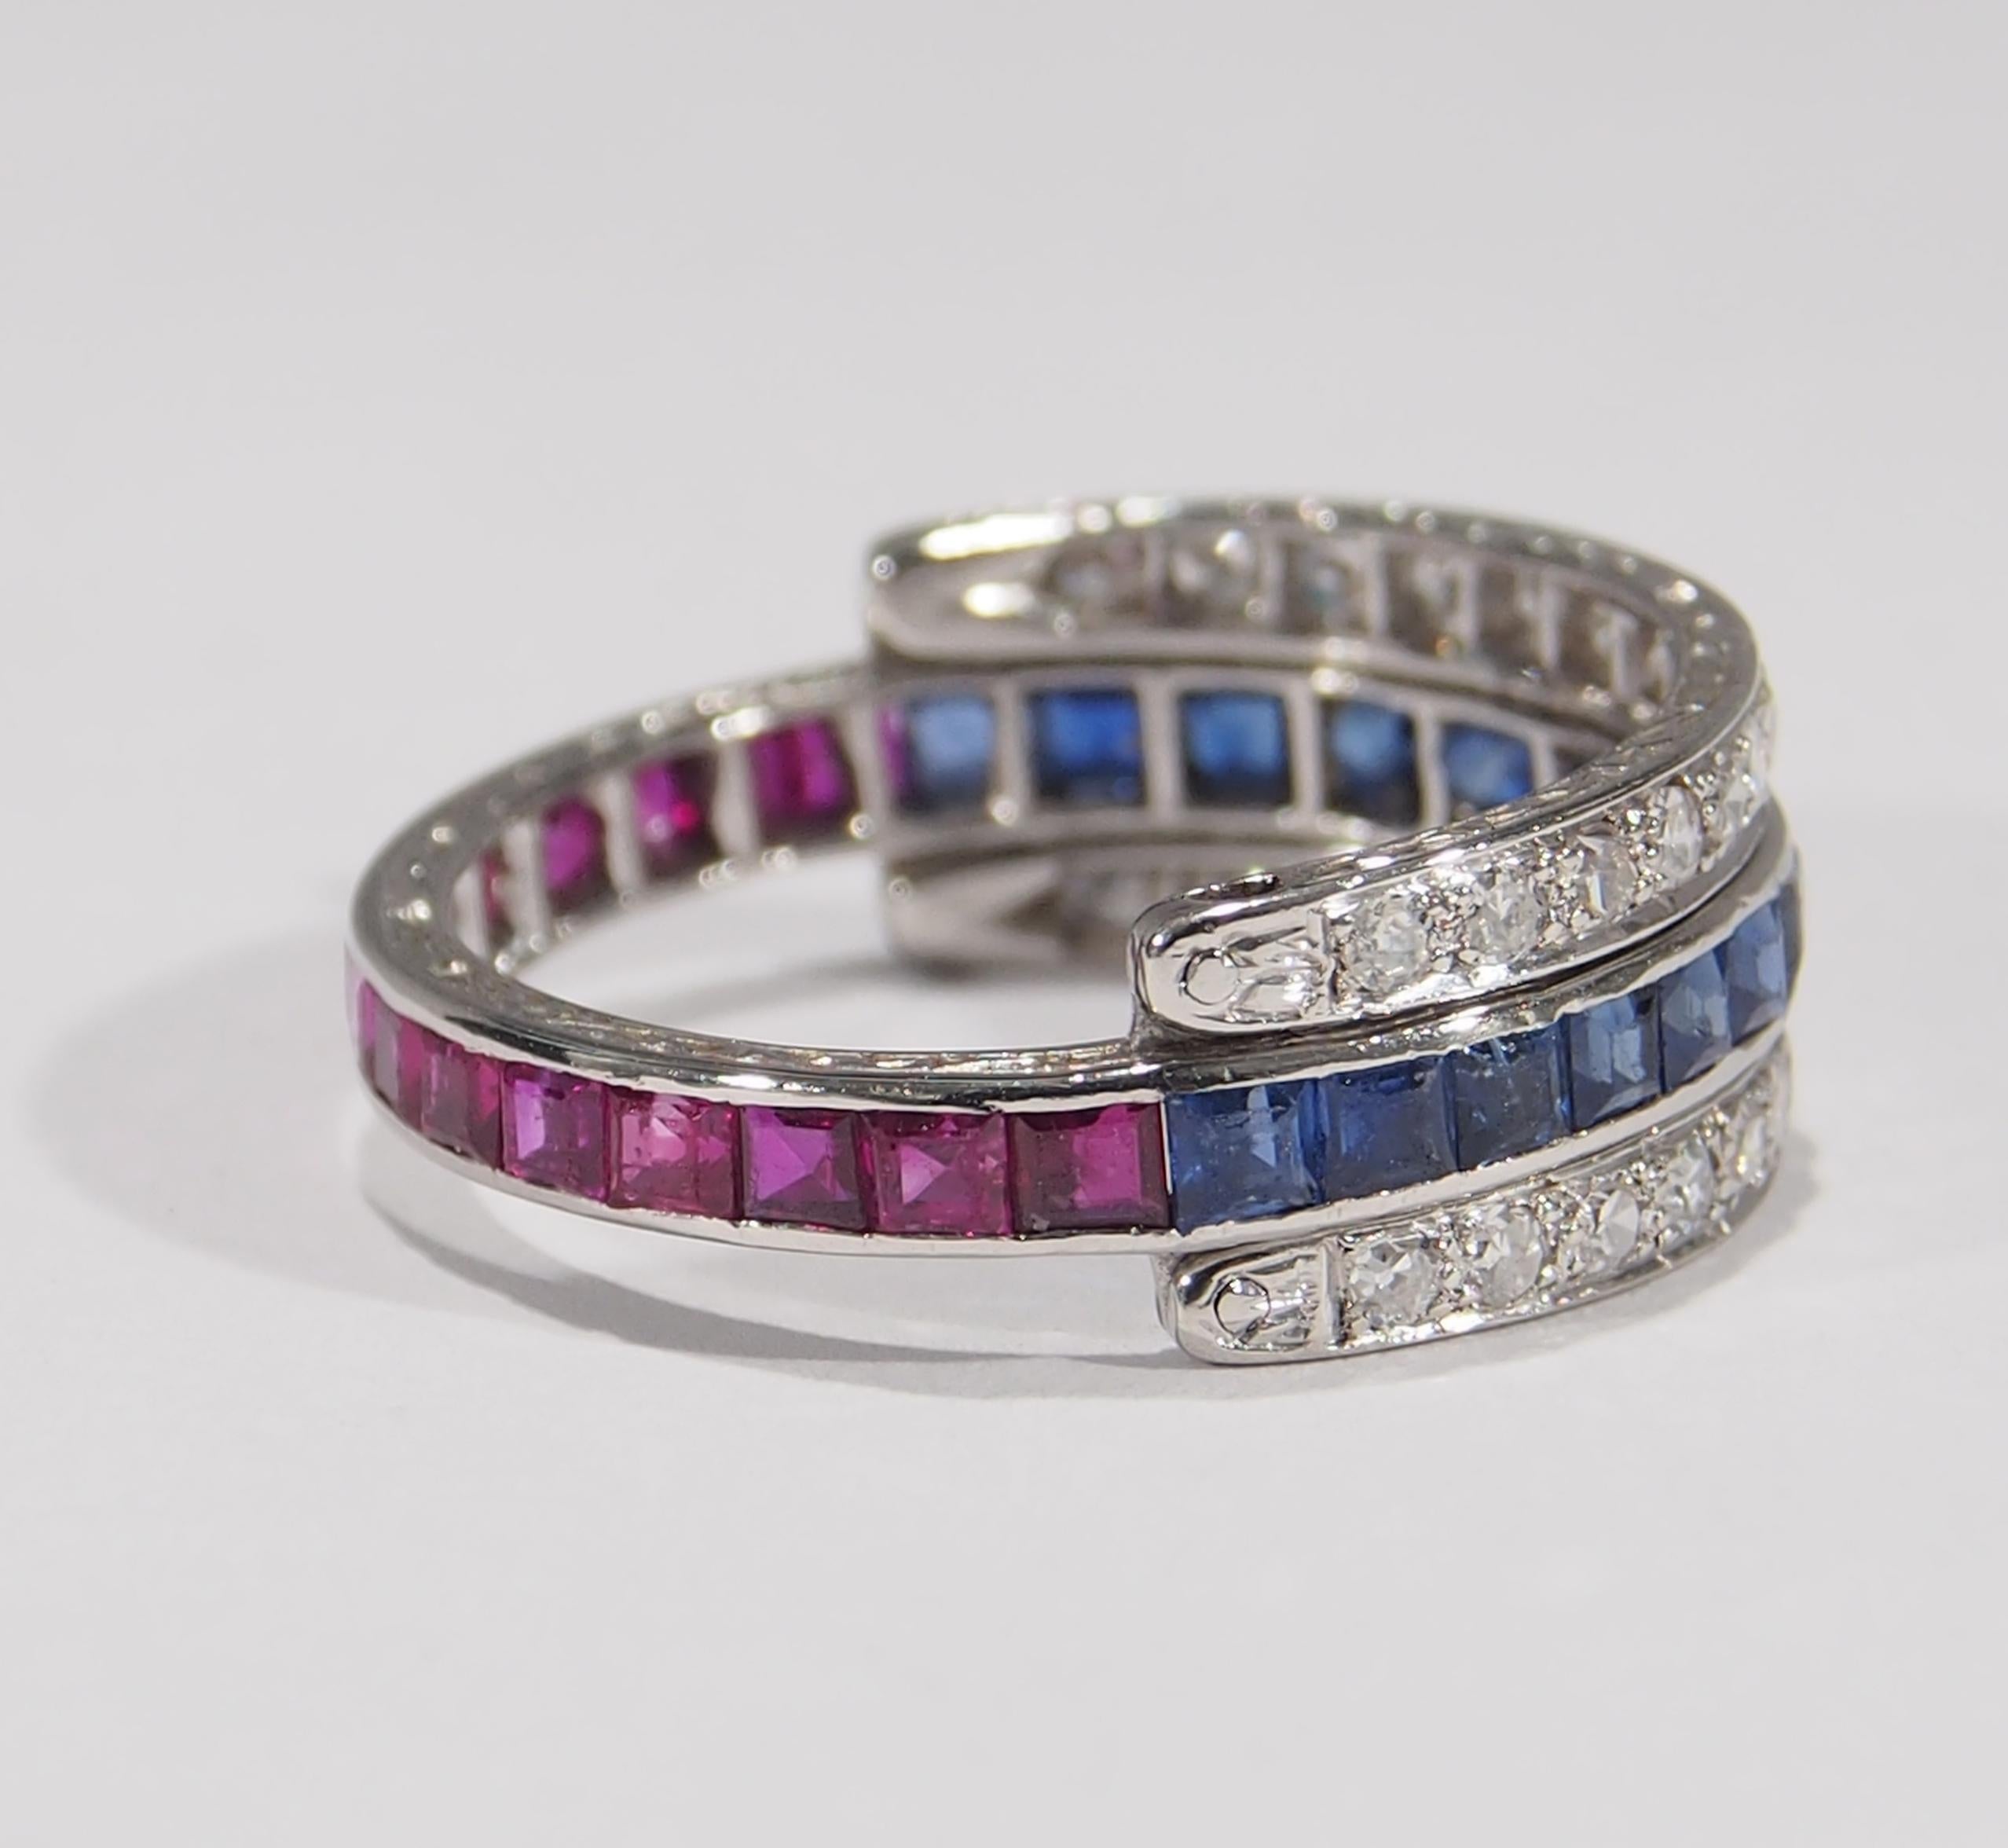 This is a unique Platinum Art Deco Style Interchangeable ring. In the center is an eternity ring set halfway around with (16) Princess Cut Sapphires, approximately 1.28 total weight and halfway with (15) Princess Cut Rubies, approximately 1.20 total